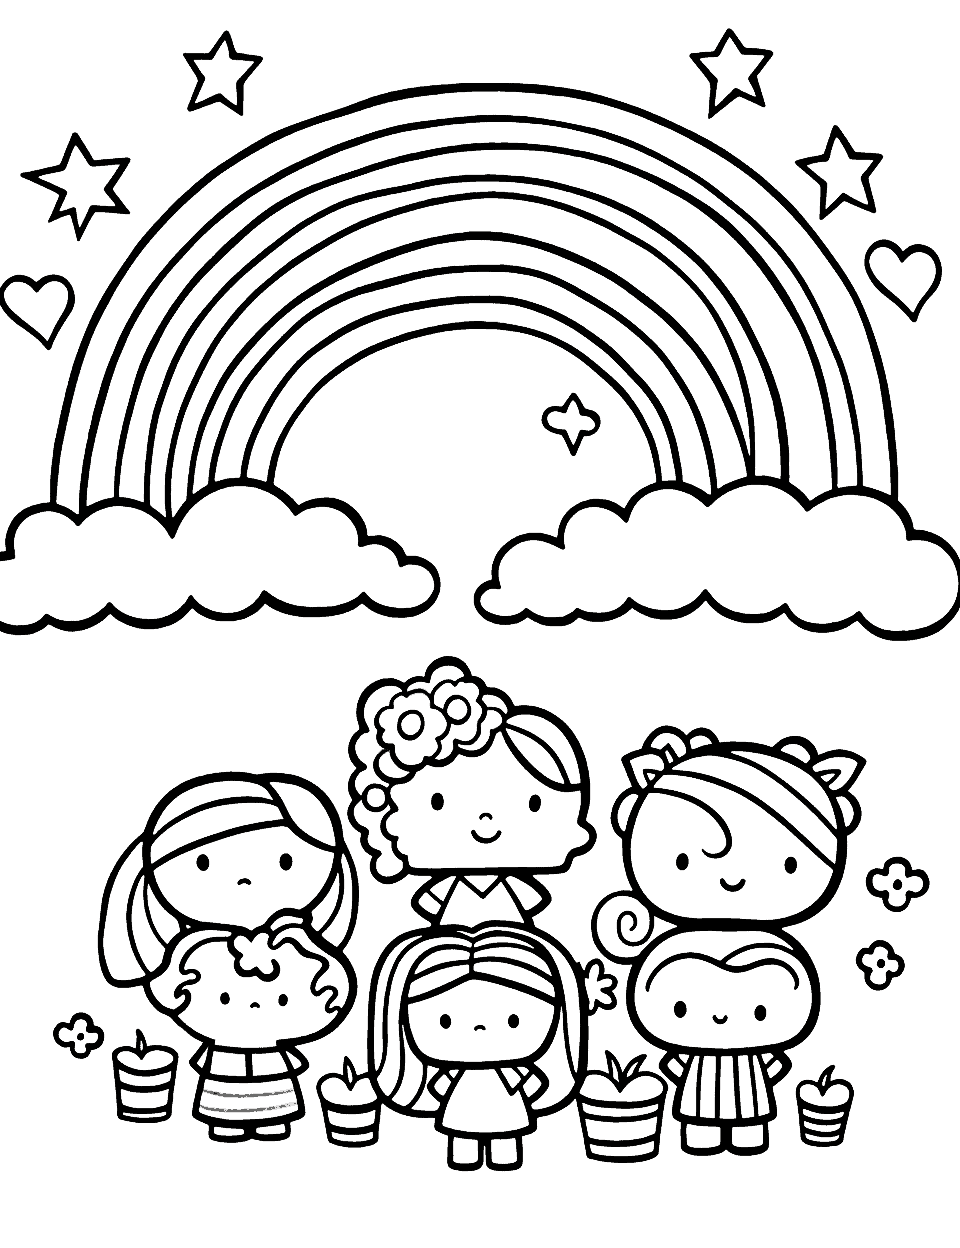 Red from Rainbow Friends Coloring Pages - Free Printable Coloring Pages